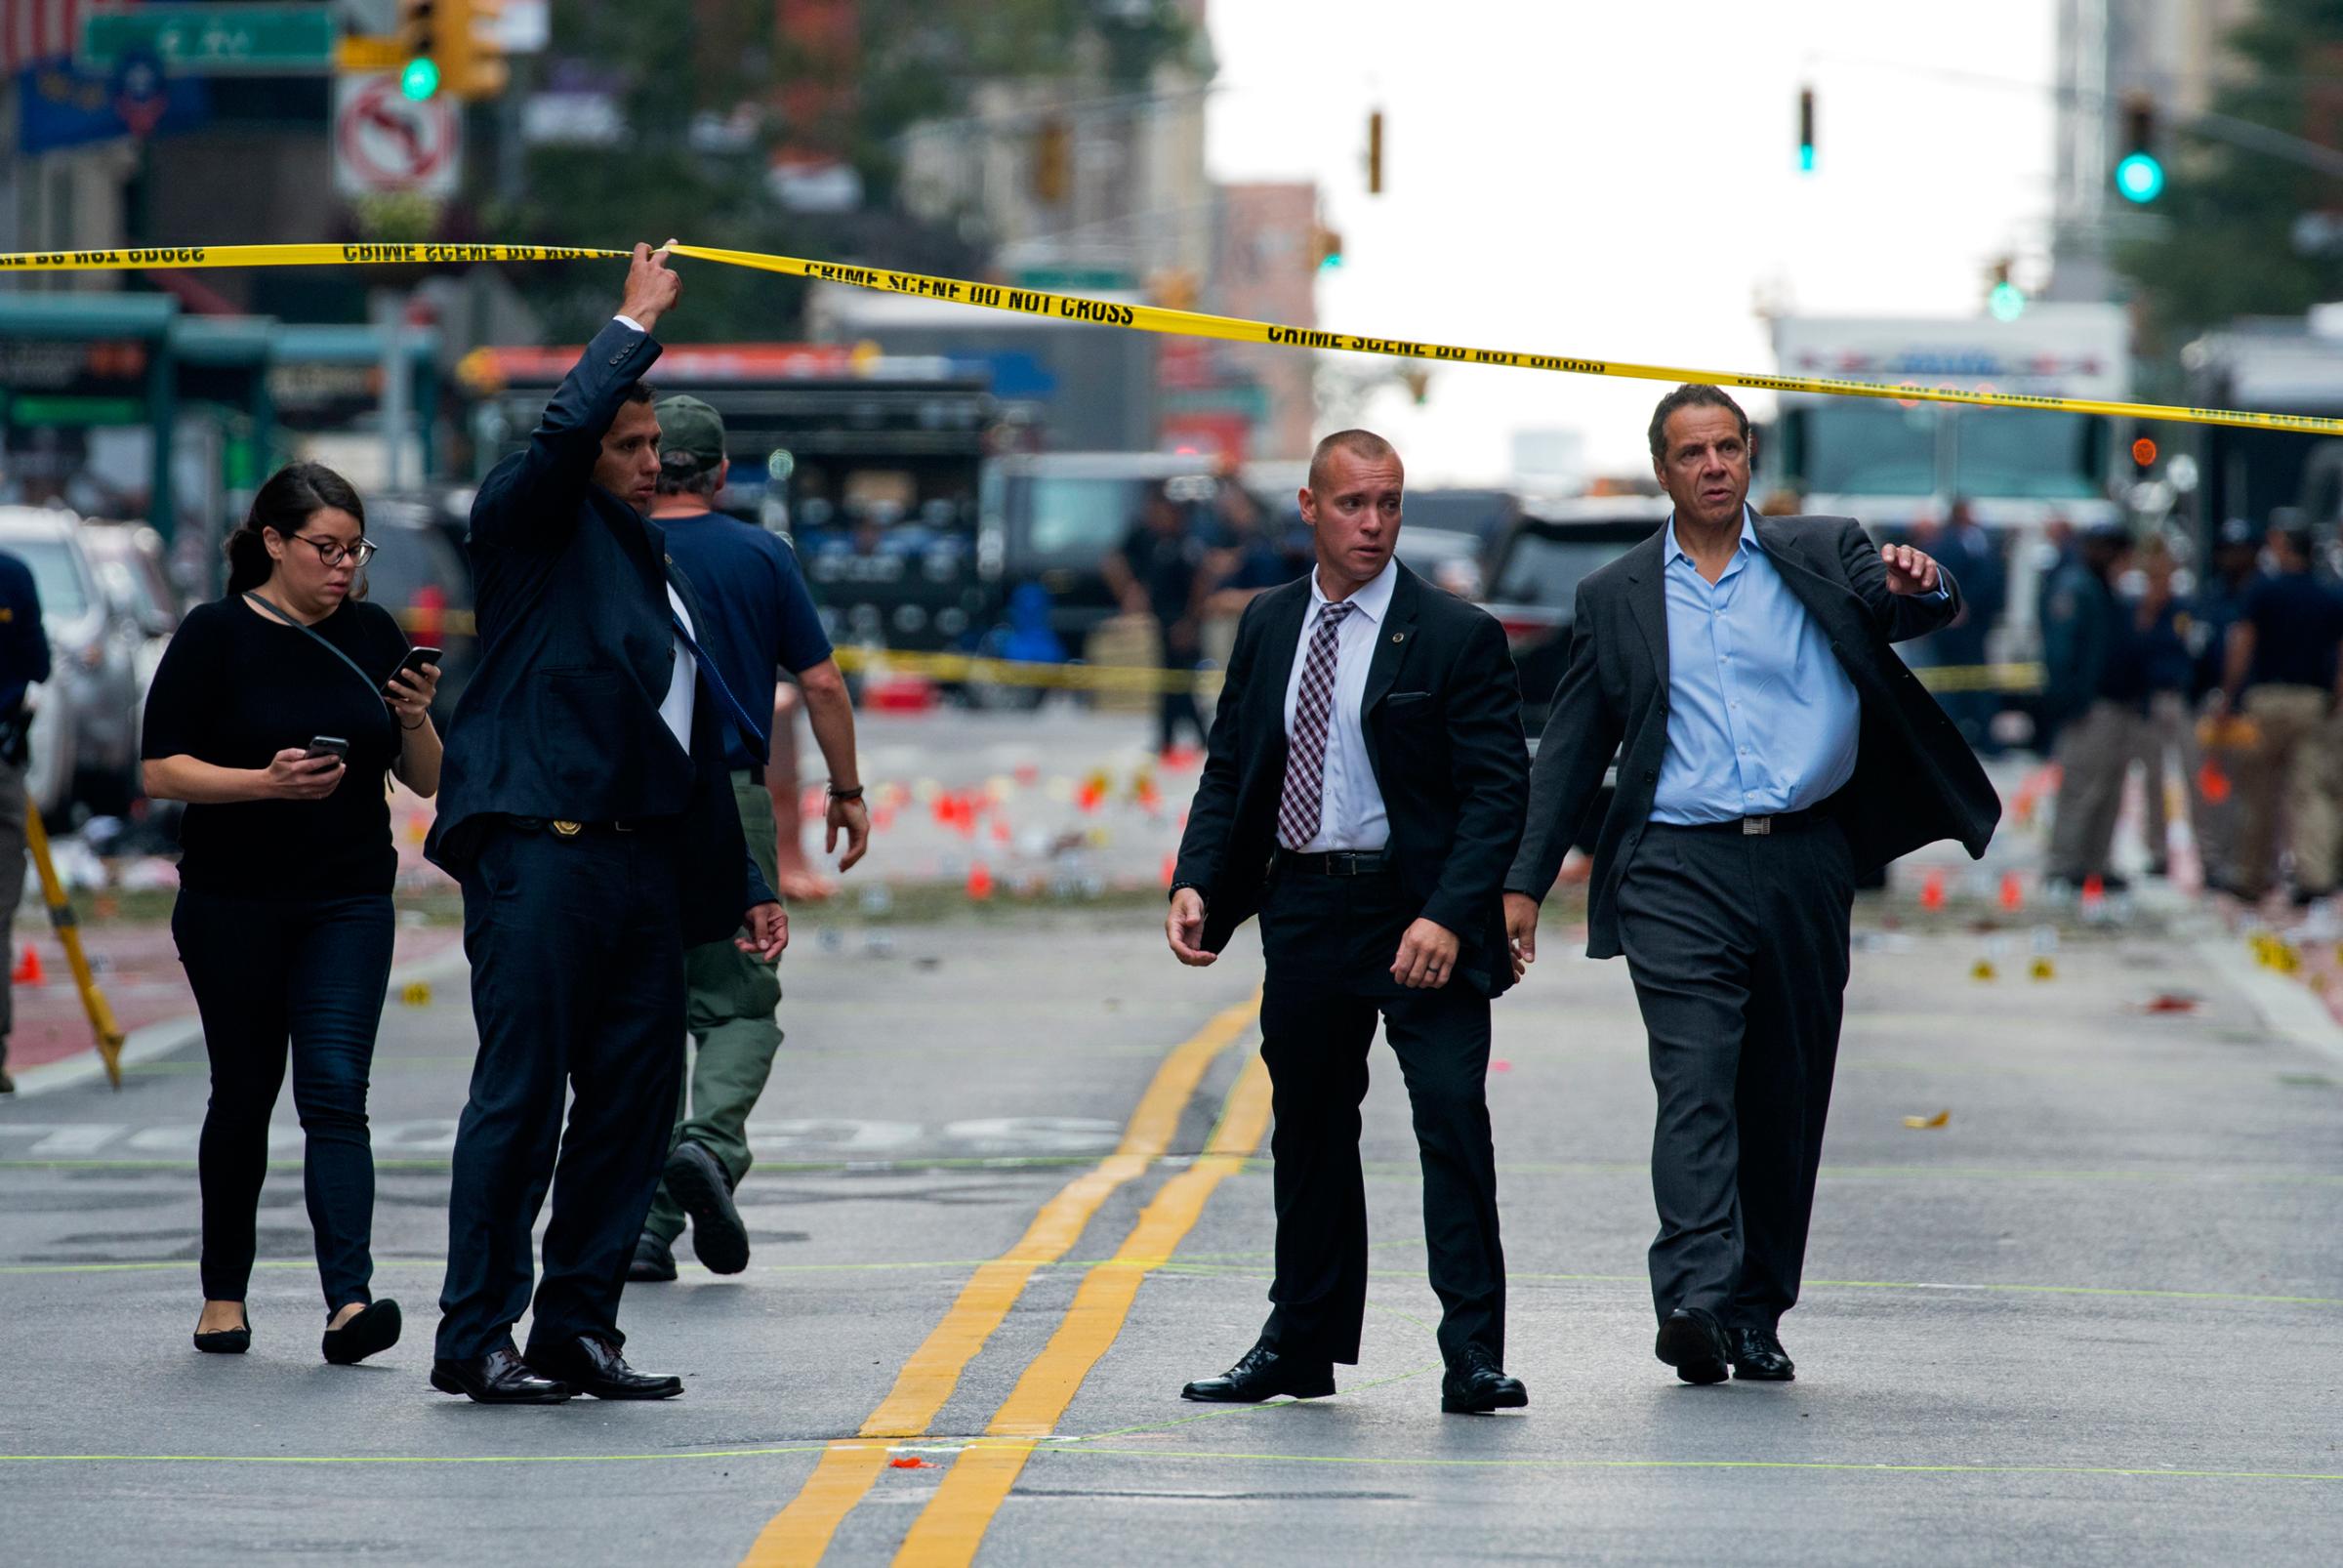 New York Gov. Andrew Cuomo, right, walks from the scene of an explosion in Manhattan's Chelsea neighborhood, in New York, Sunday, Sept. 18, 2016, after an incident that injured passers-by Saturday night. (AP Photo/Craig Ruttle)